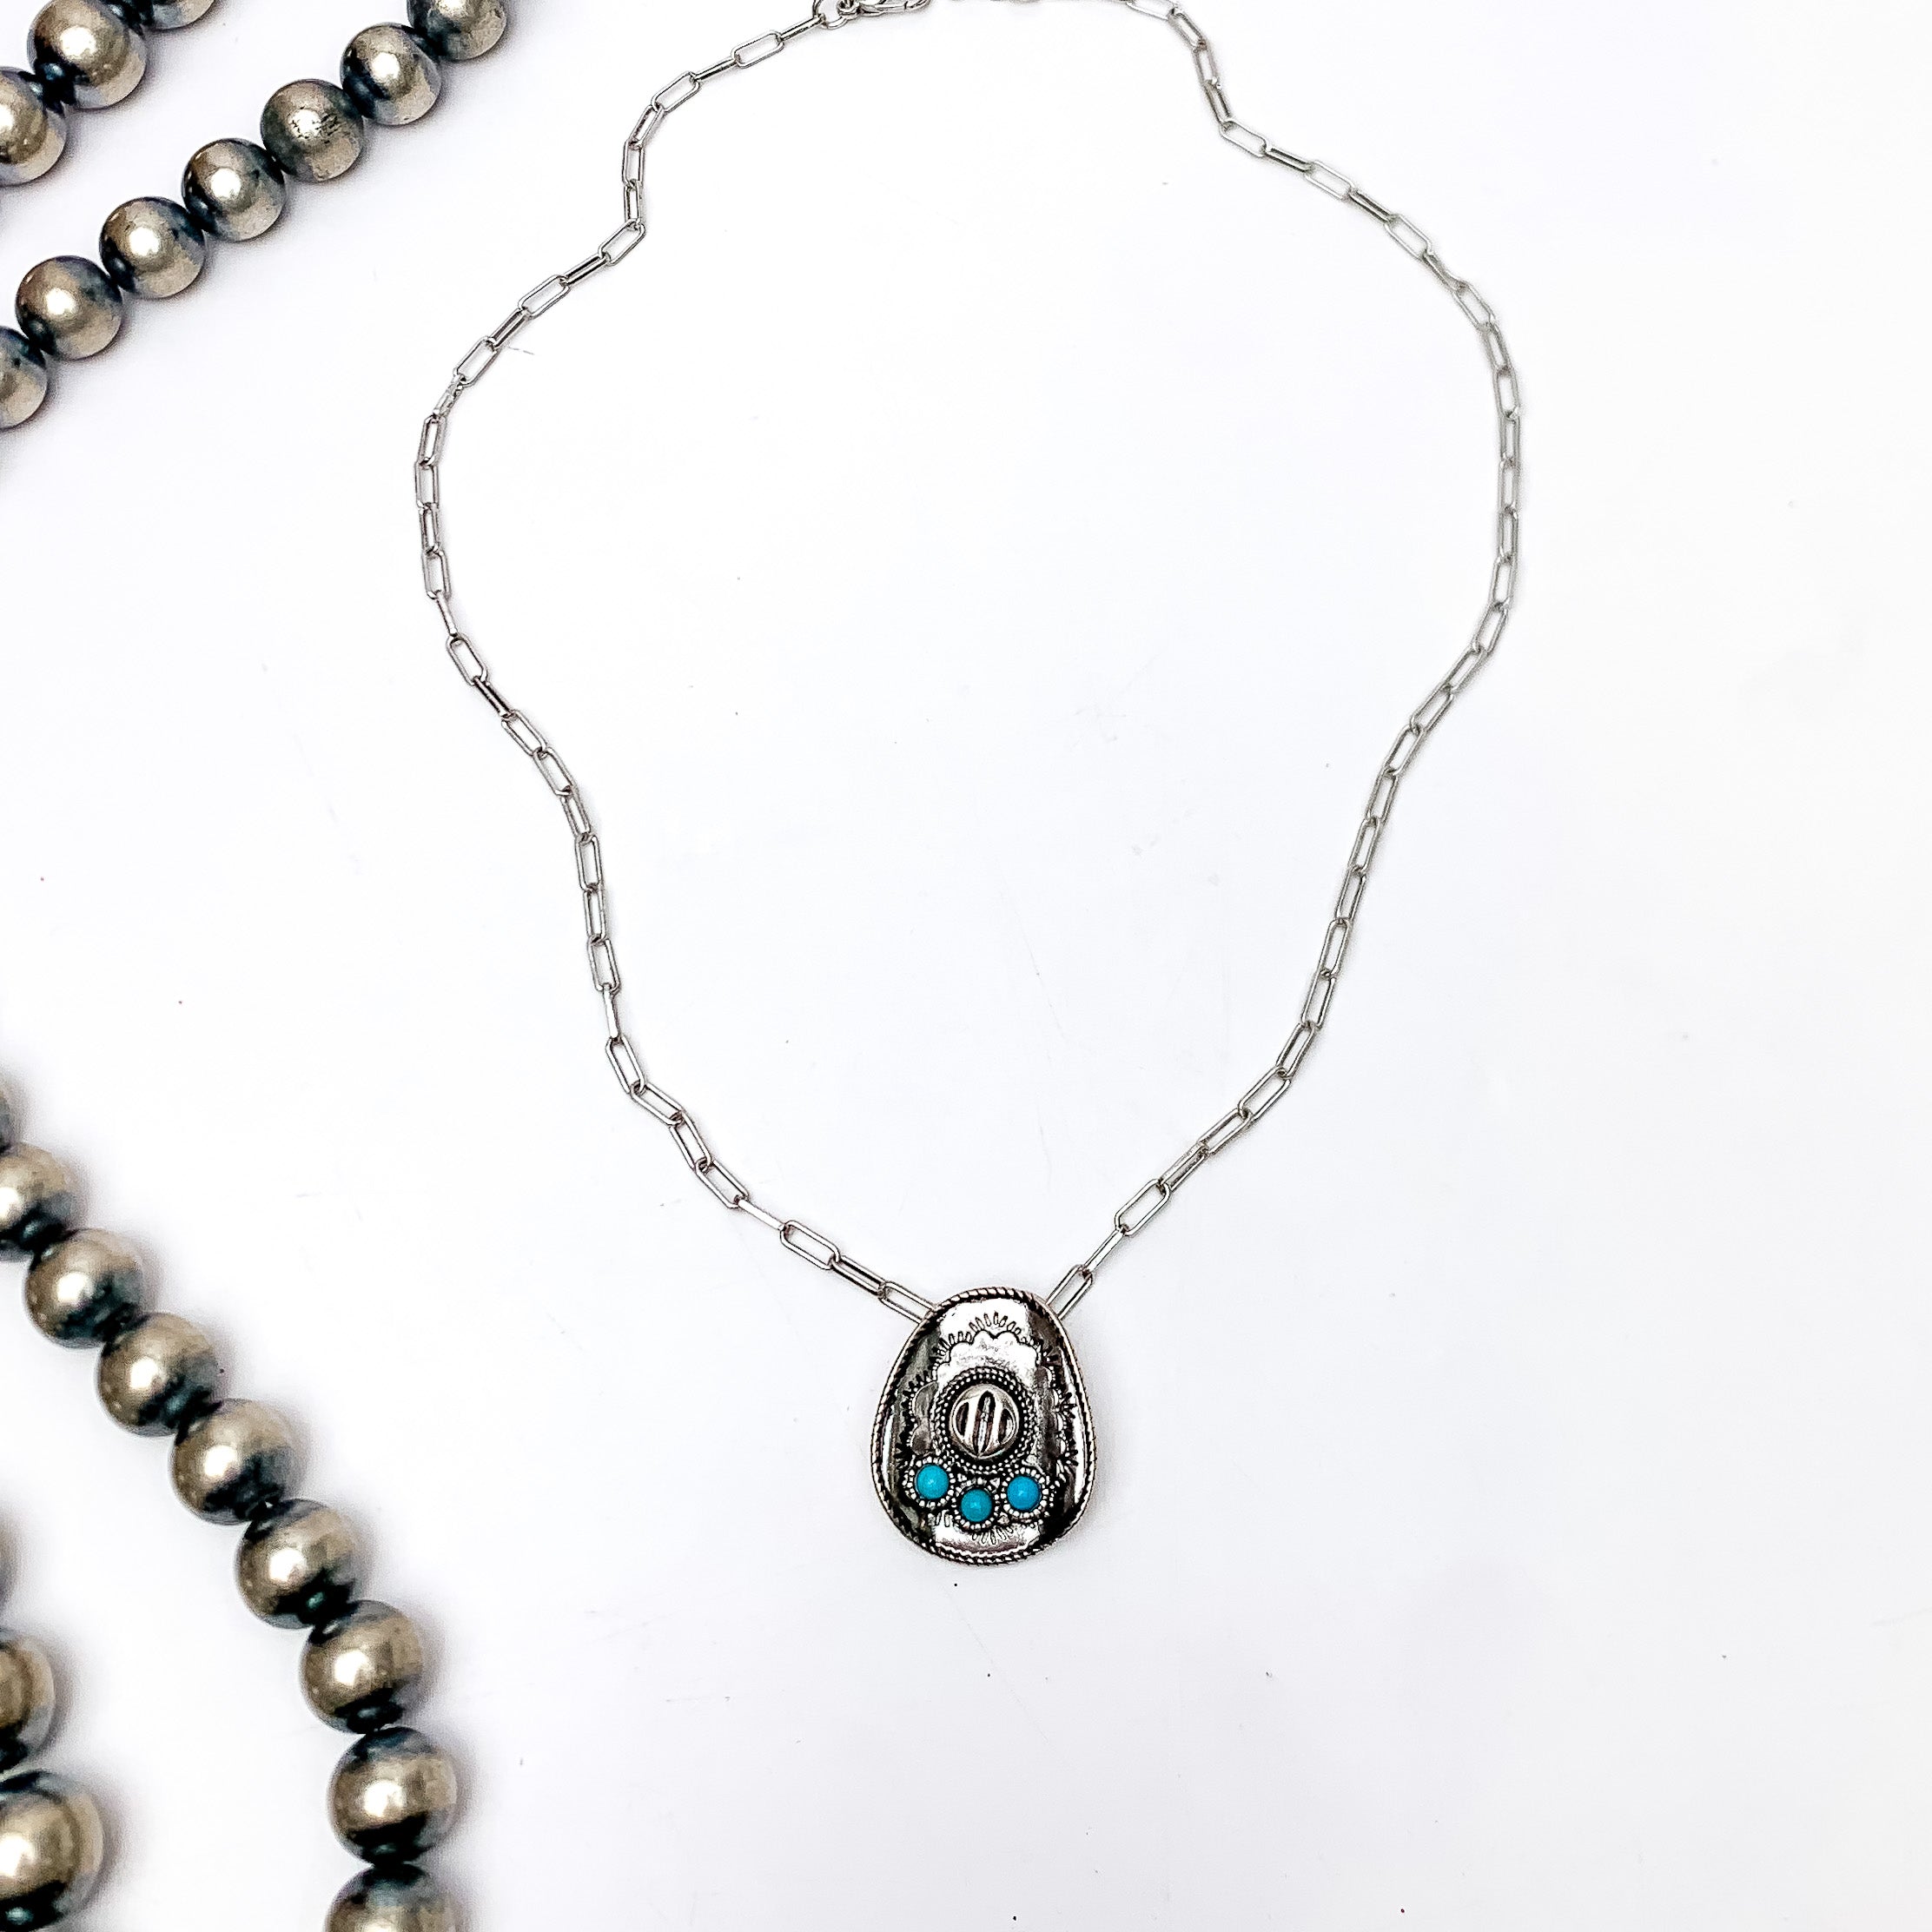 Cowgirl Chain Silver Tone Necklace With Cowboy Hat Pendent. Pictured on a white background with Navajo beads to the left of the necklace.